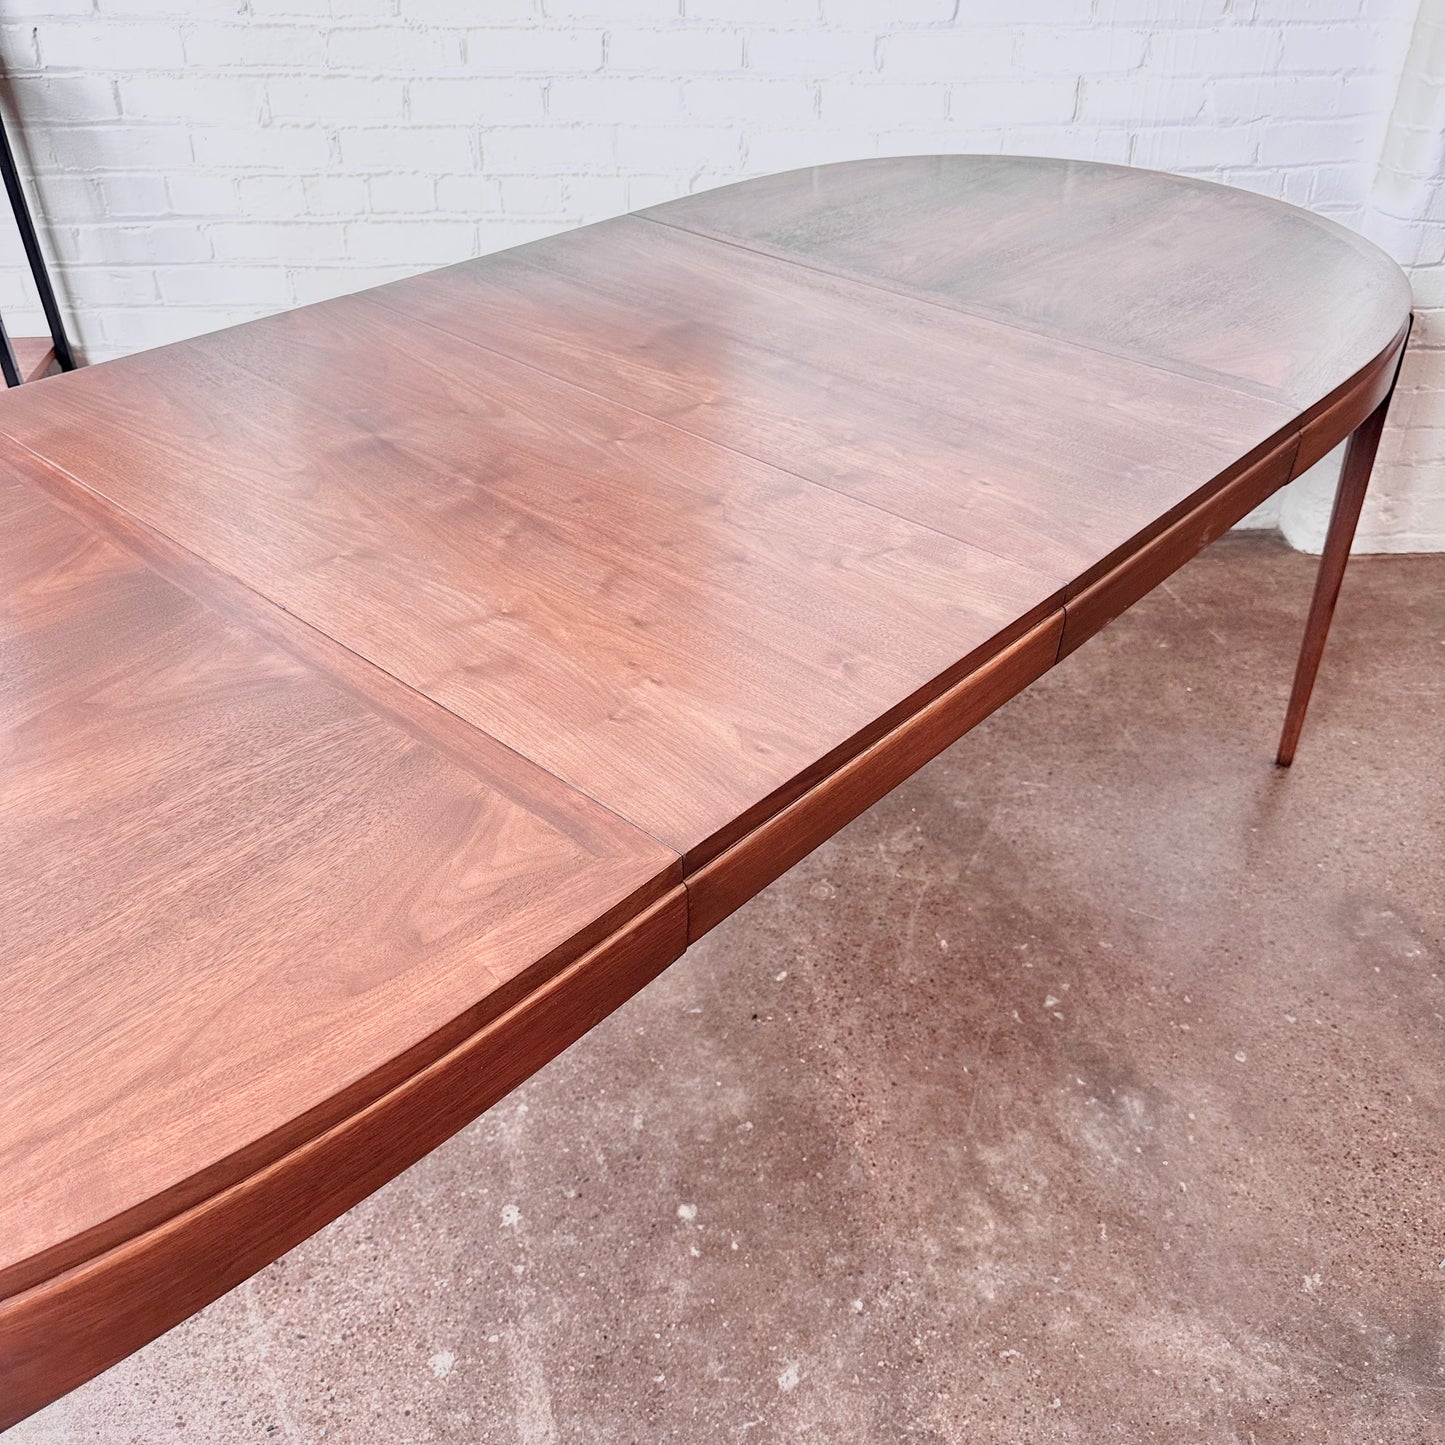 MID-CENTURY WALNUT OVAL LANE DINING TABLE + TWO LEAVES - RESTORED